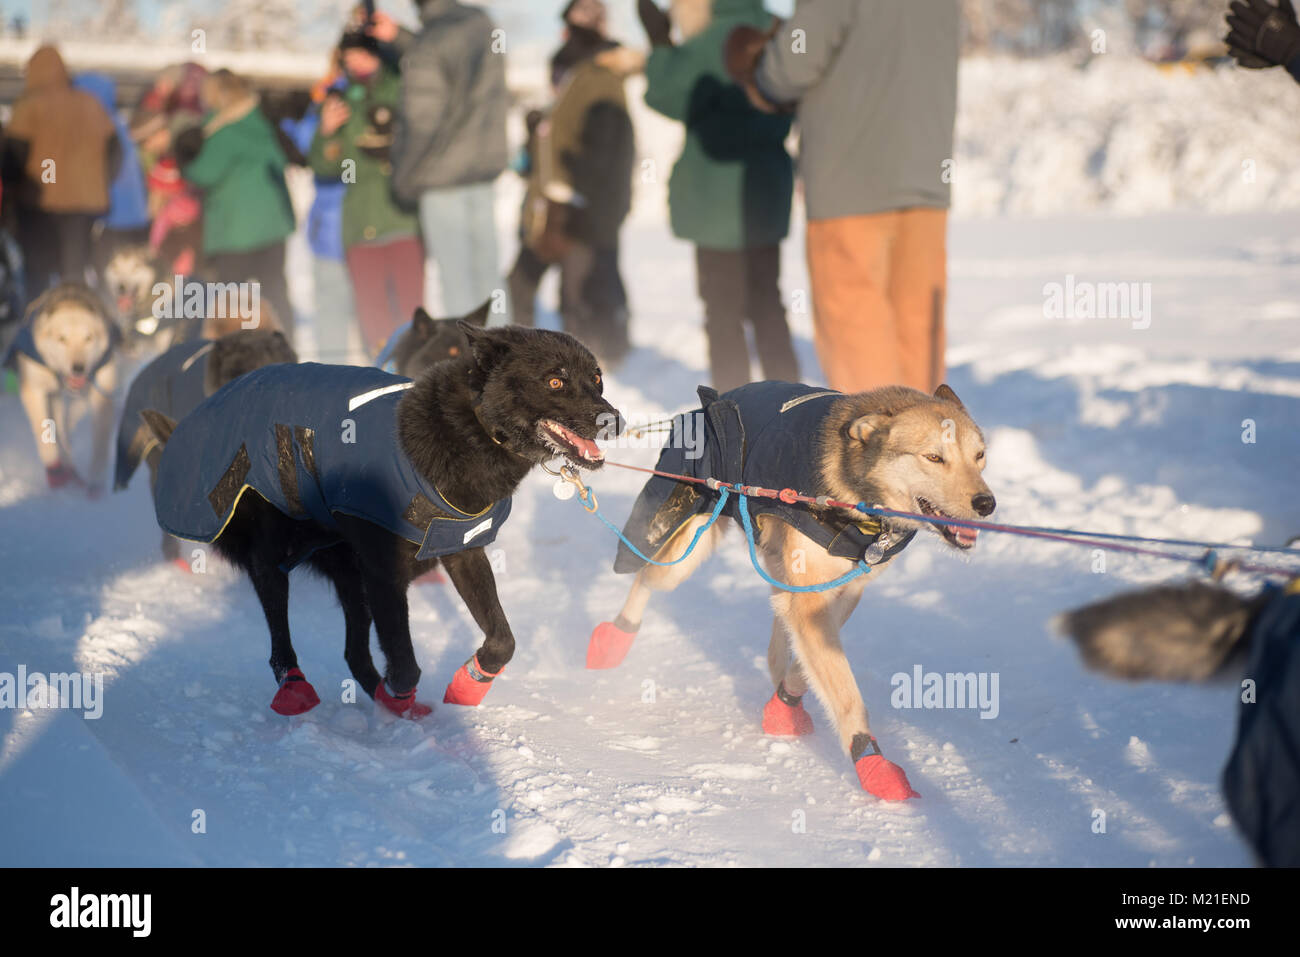 FAIRBANKS, ALASKA - FEBRUARY 3, 2018: Dogs from veteran Hugh Neff's team stare intently down the trail of the Yukon Quest. Credit: Roger Asbury/Alamy Live News Stock Photo